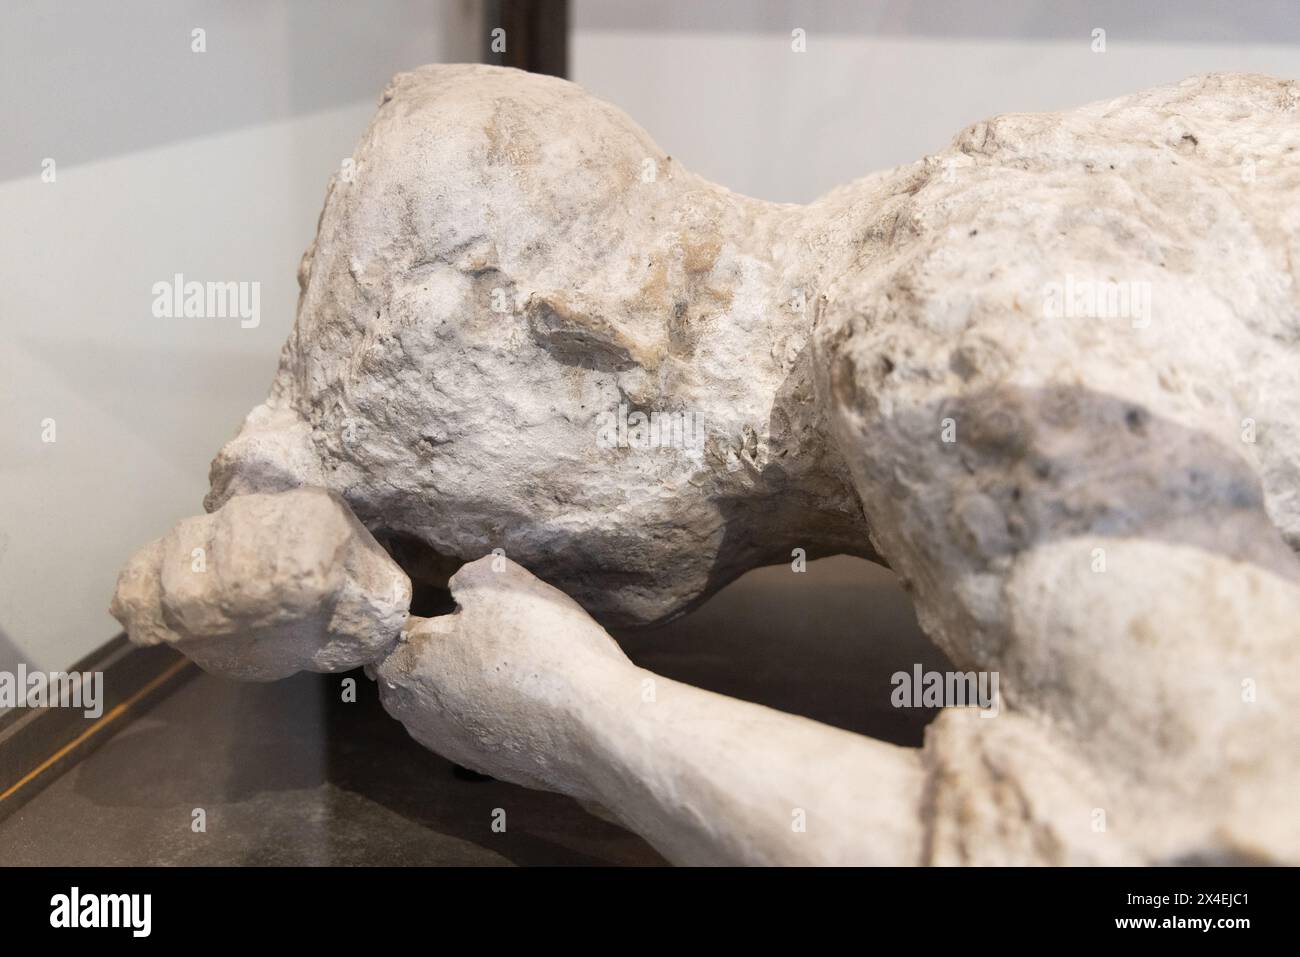 Pompeii bodies; close up of the head of a supine woman, cast from the antiquarium, Pompeii UNESCO World Heritage site, Italy. Victim of the eruption,. Stock Photo